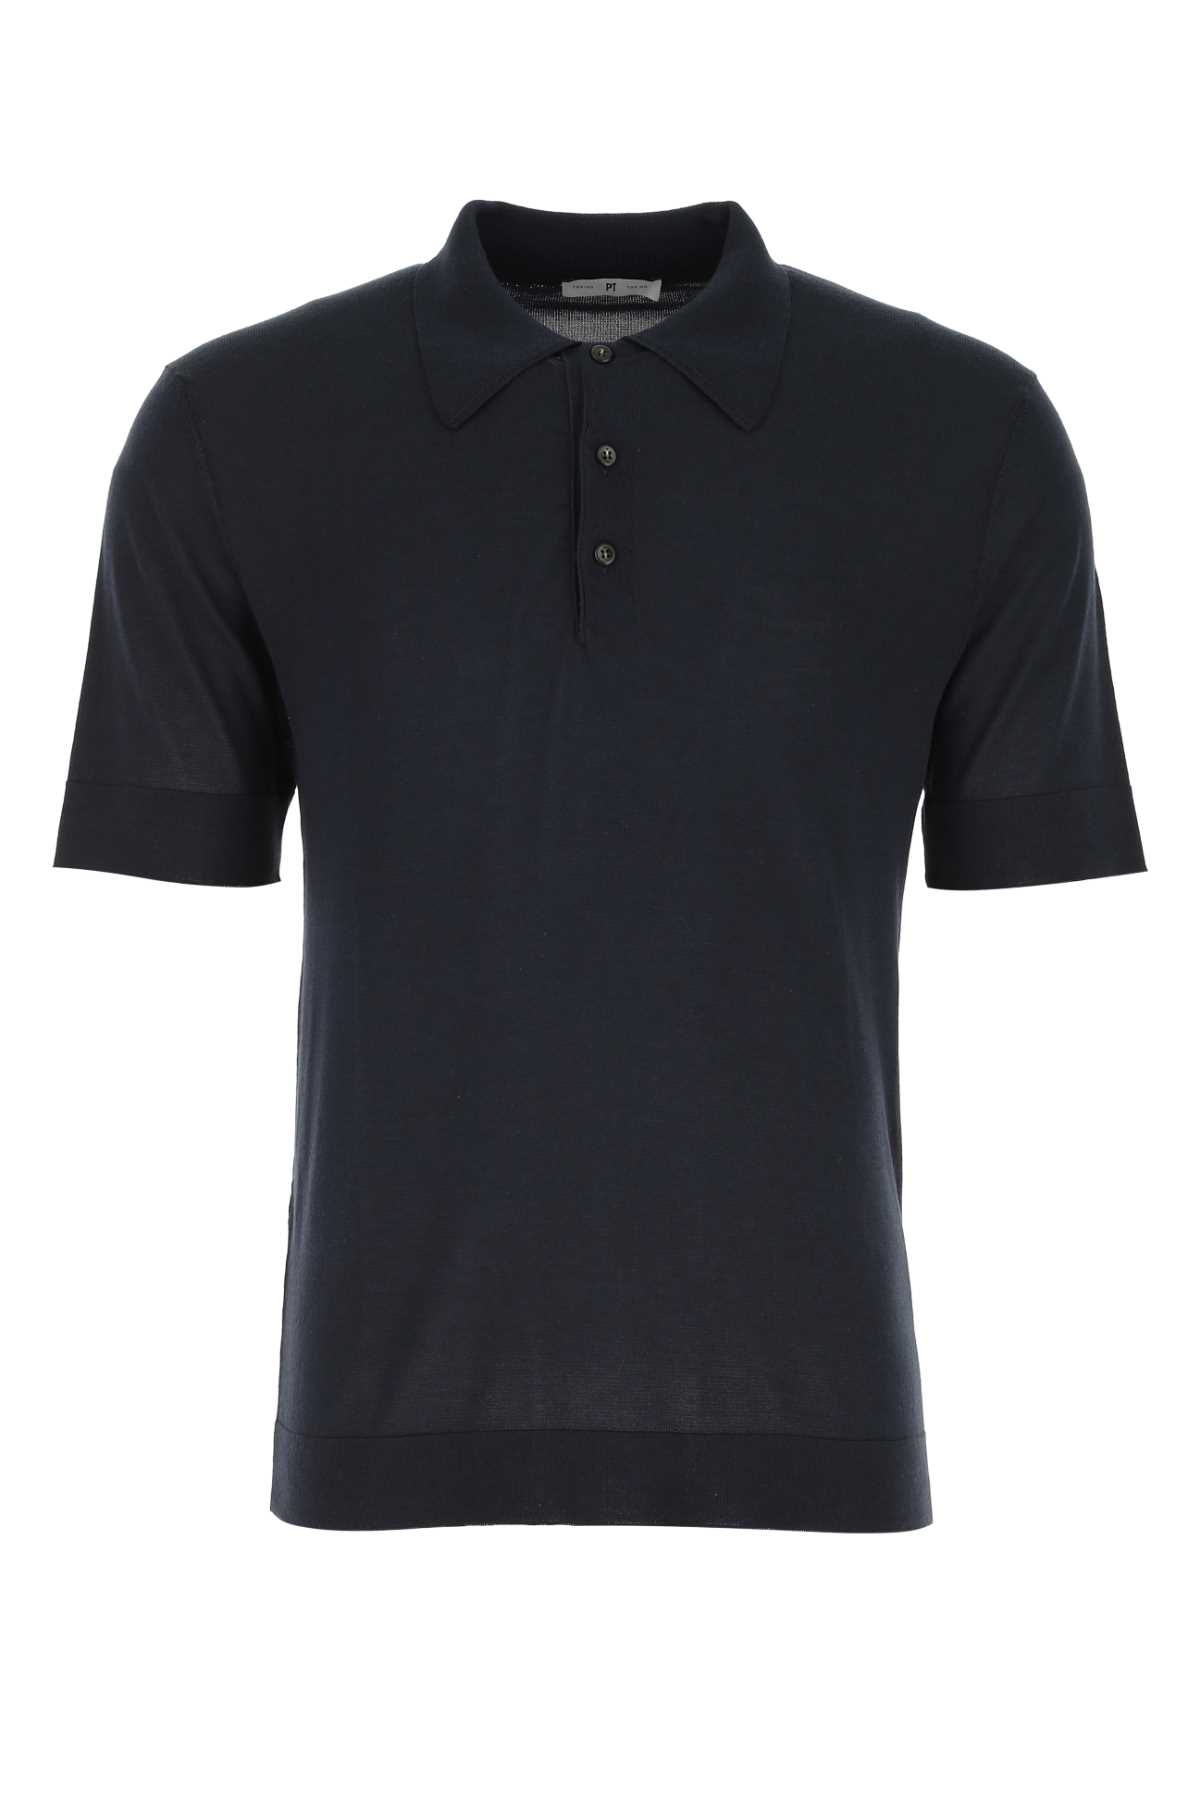 Pt01 Navy Blue Cotton Blend Polo Shirt In 0350